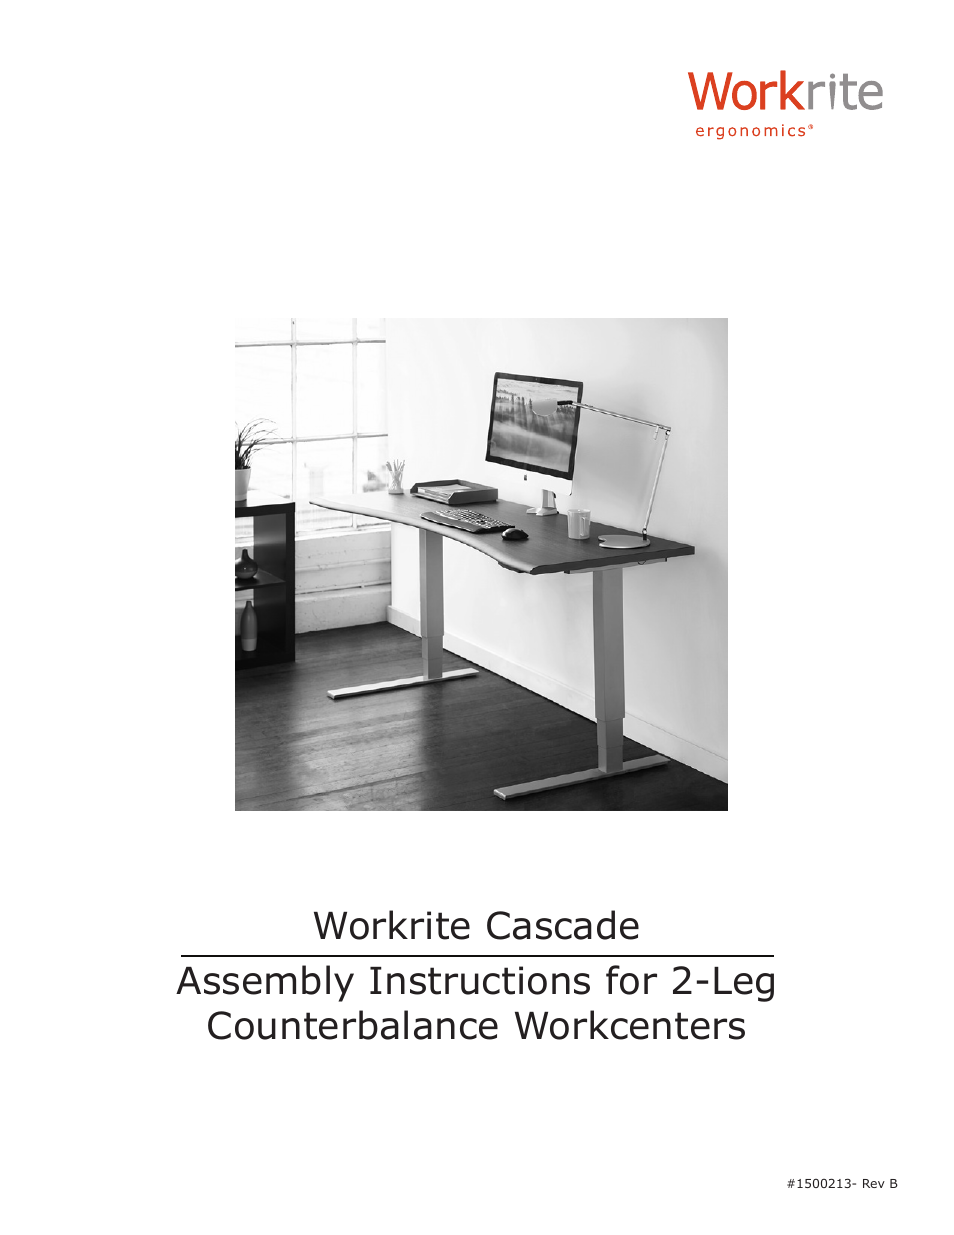 Cascade Assembly Instructions for 2-Leg Counterbalance Workcenters